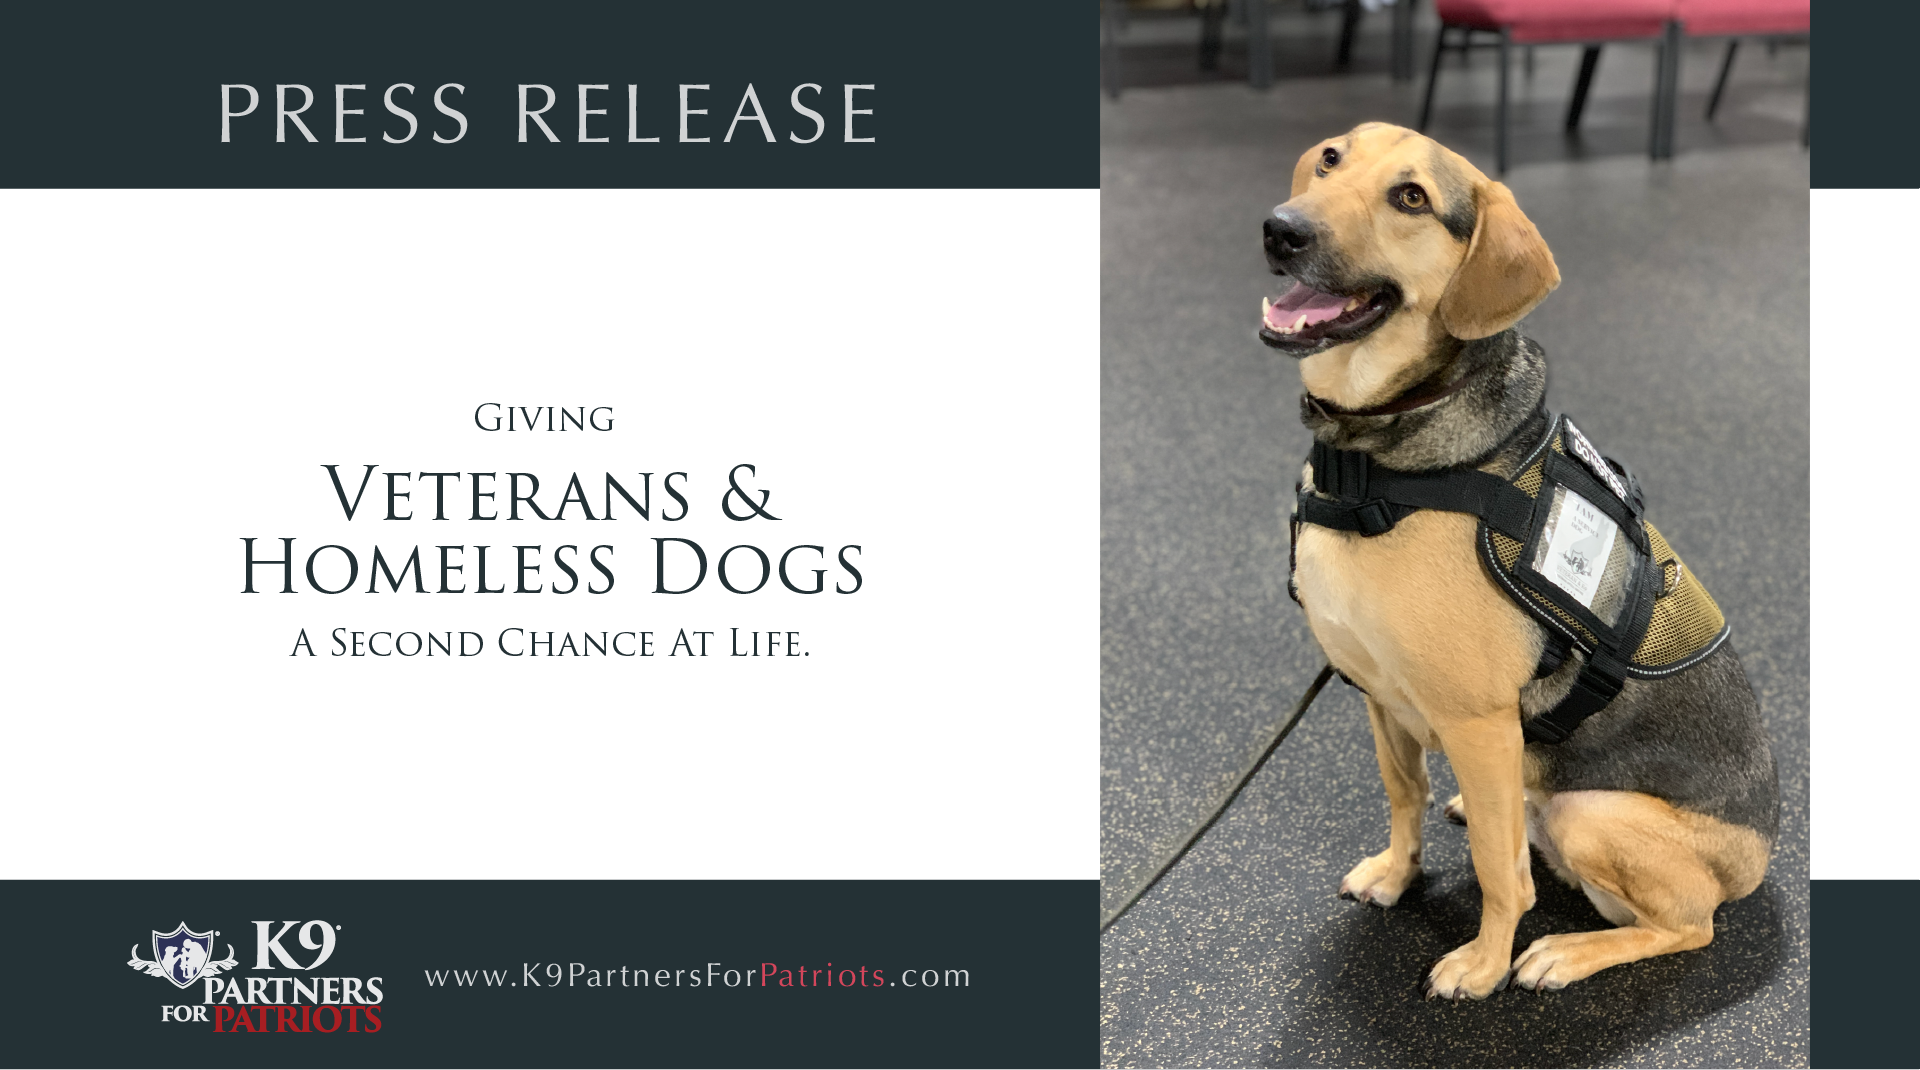 Press Release - K9 Partners for Patriots